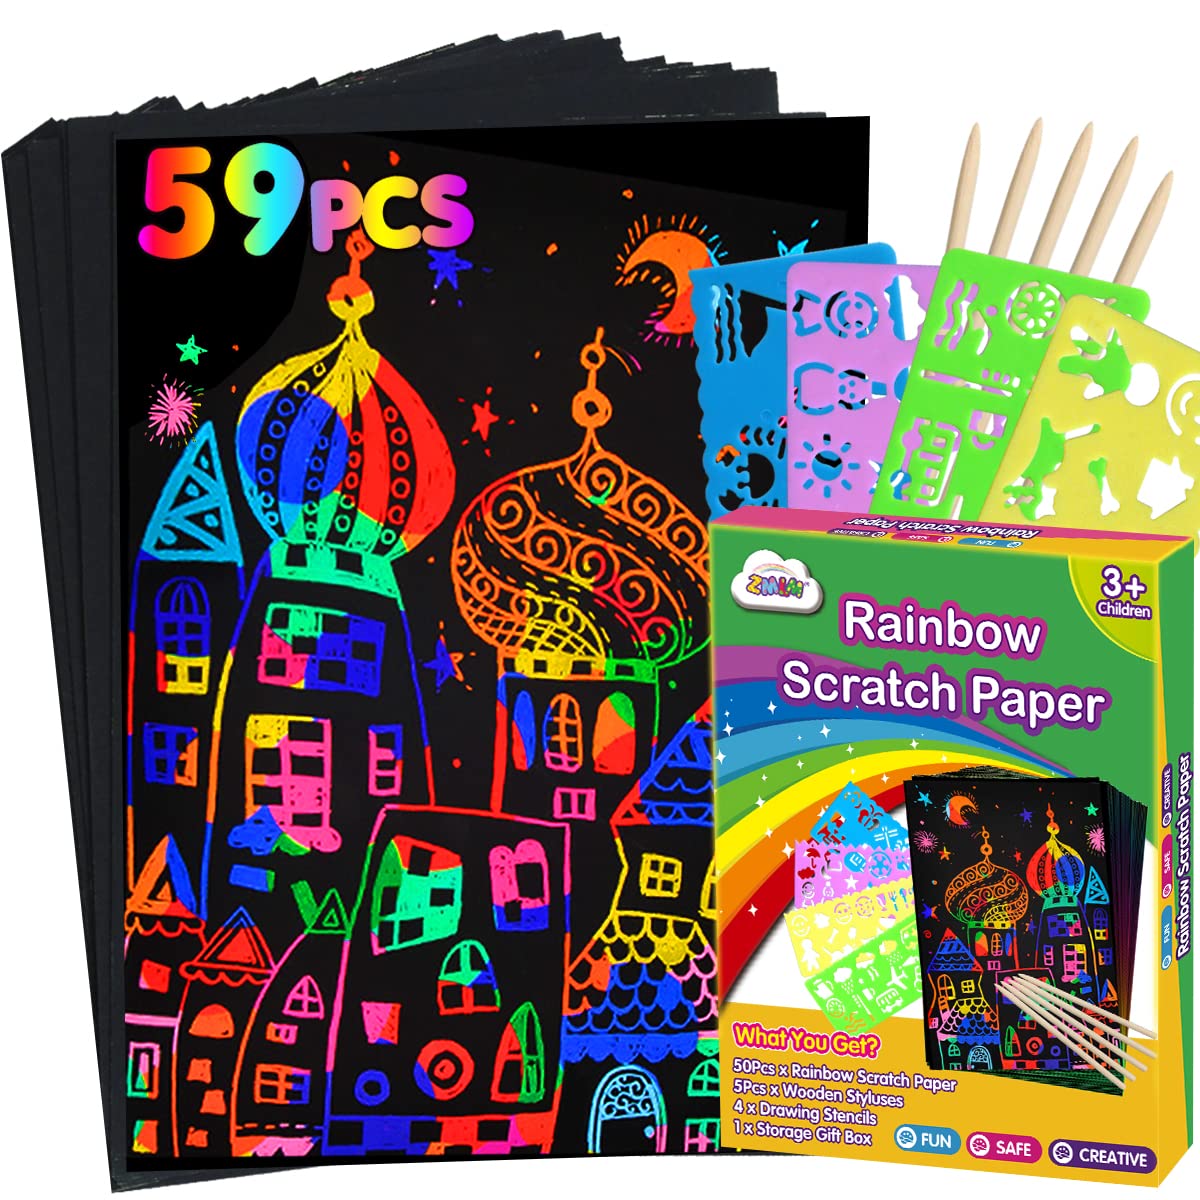 ZMLM Scratch Paper Art Set: 59Pcs Magic Drawing Art Craft Kid Black Scratch off Paper Supply Kit Toddler Preschool Learning Bulk Toy for Age 3 4 5 6 7 8 9 10 Girl Boy Holiday|Party Favor|Birthday Gift